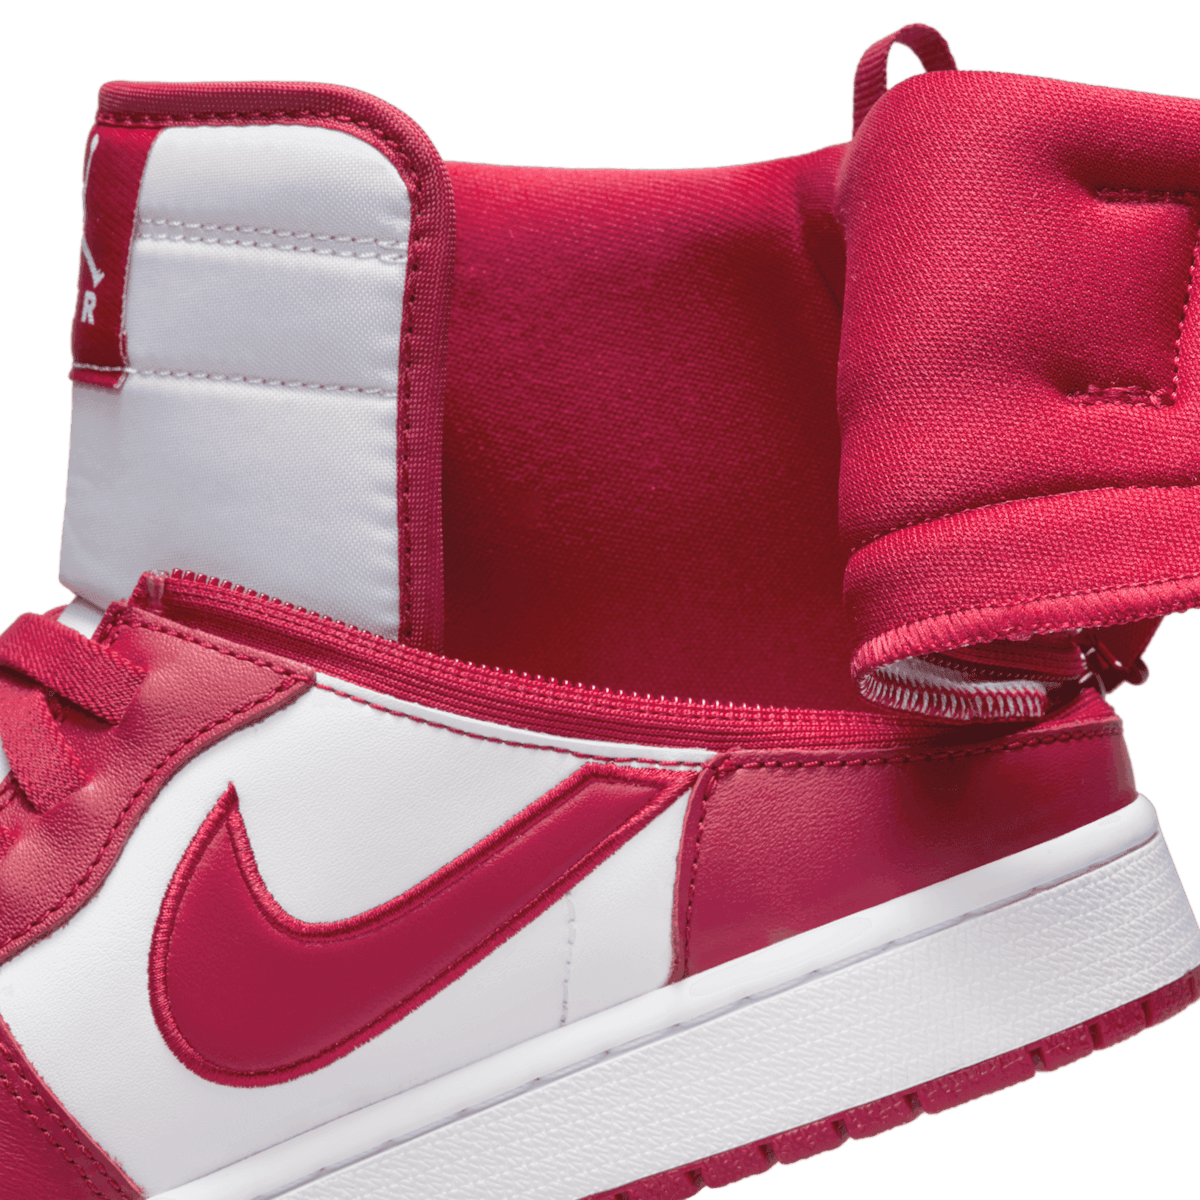 Jordan 1 Flyease Red and White Angle 9